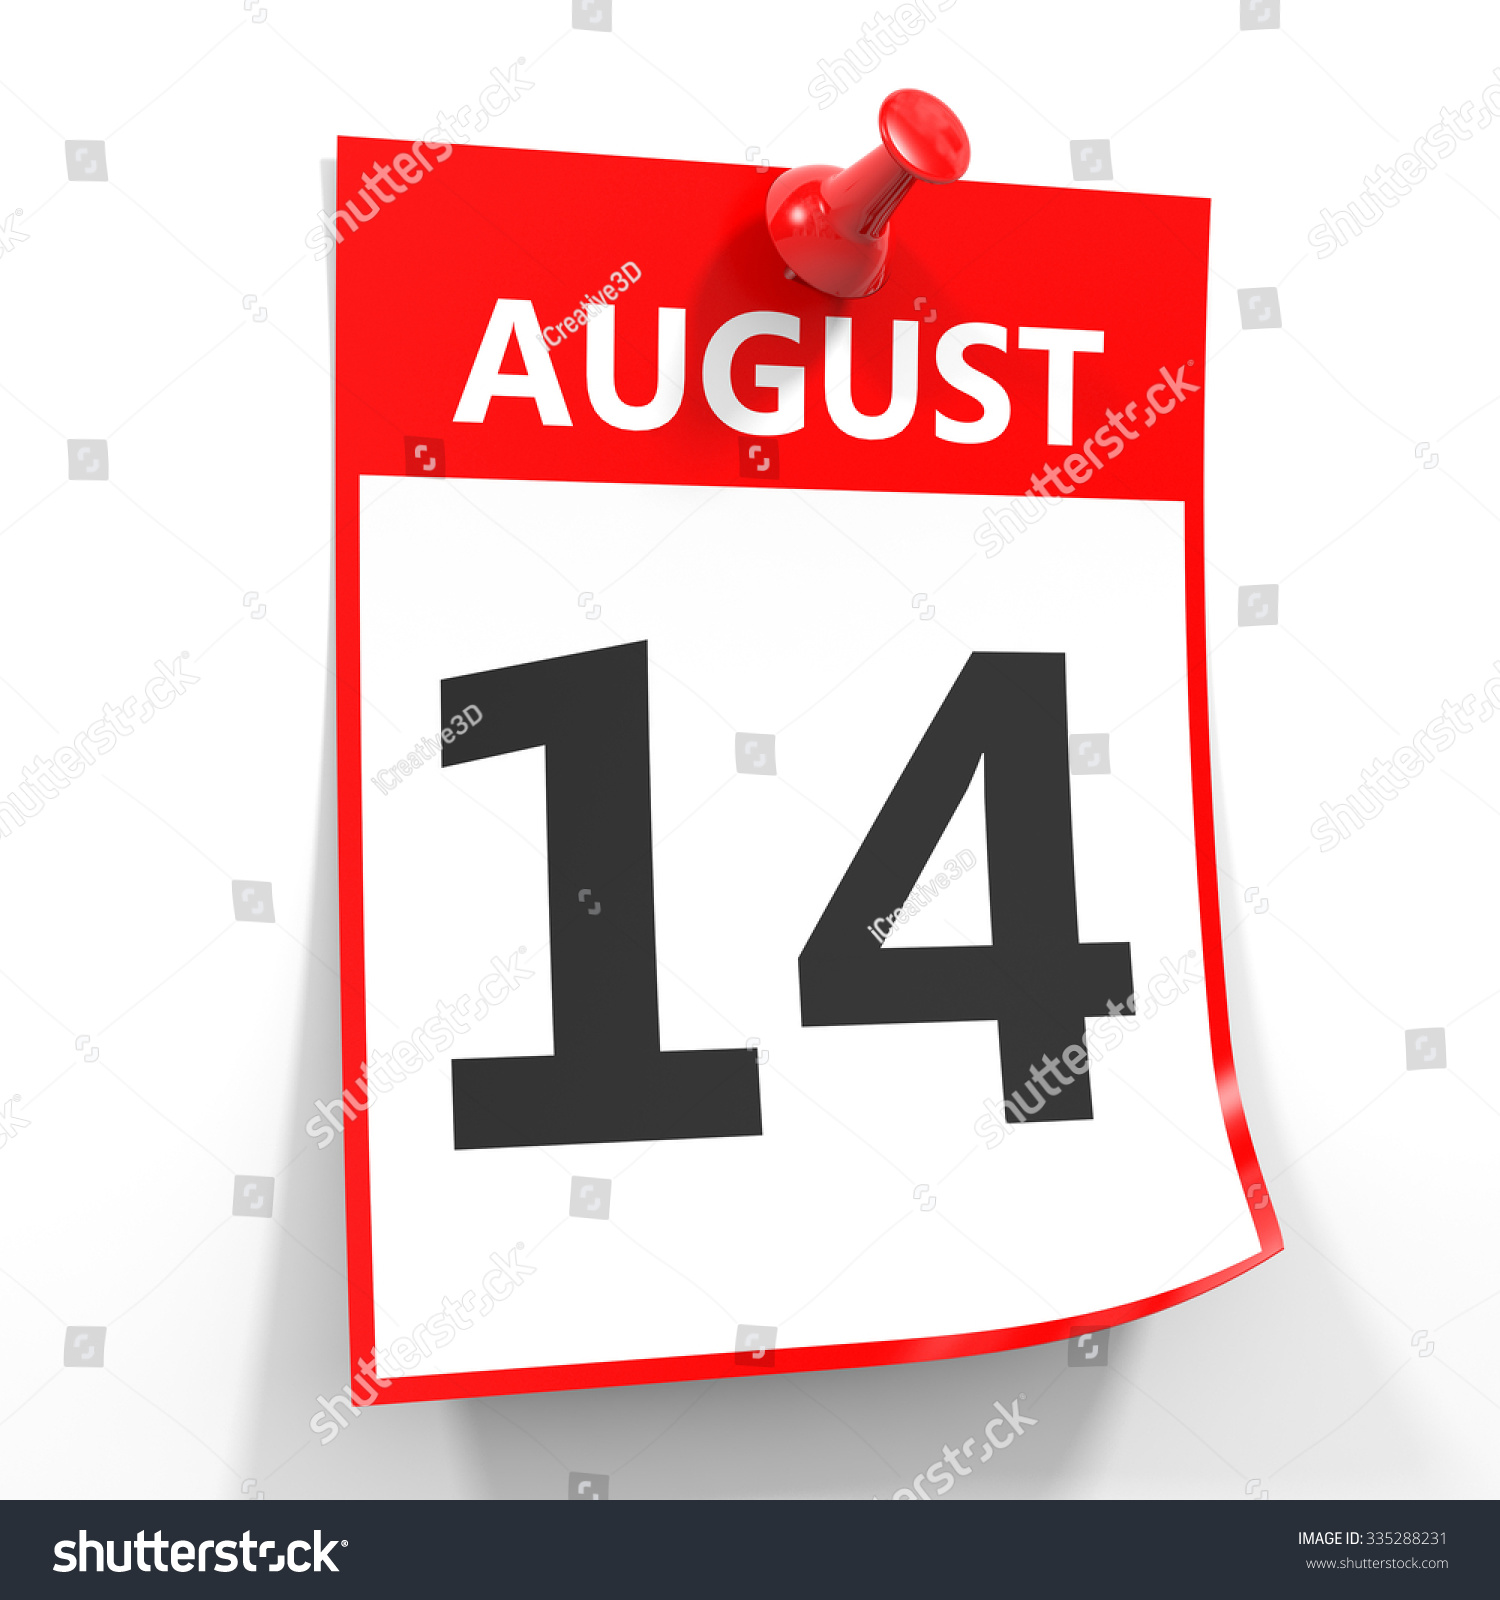 14 August Calendar Sheet With Red Pin On White Background. Illustration ...